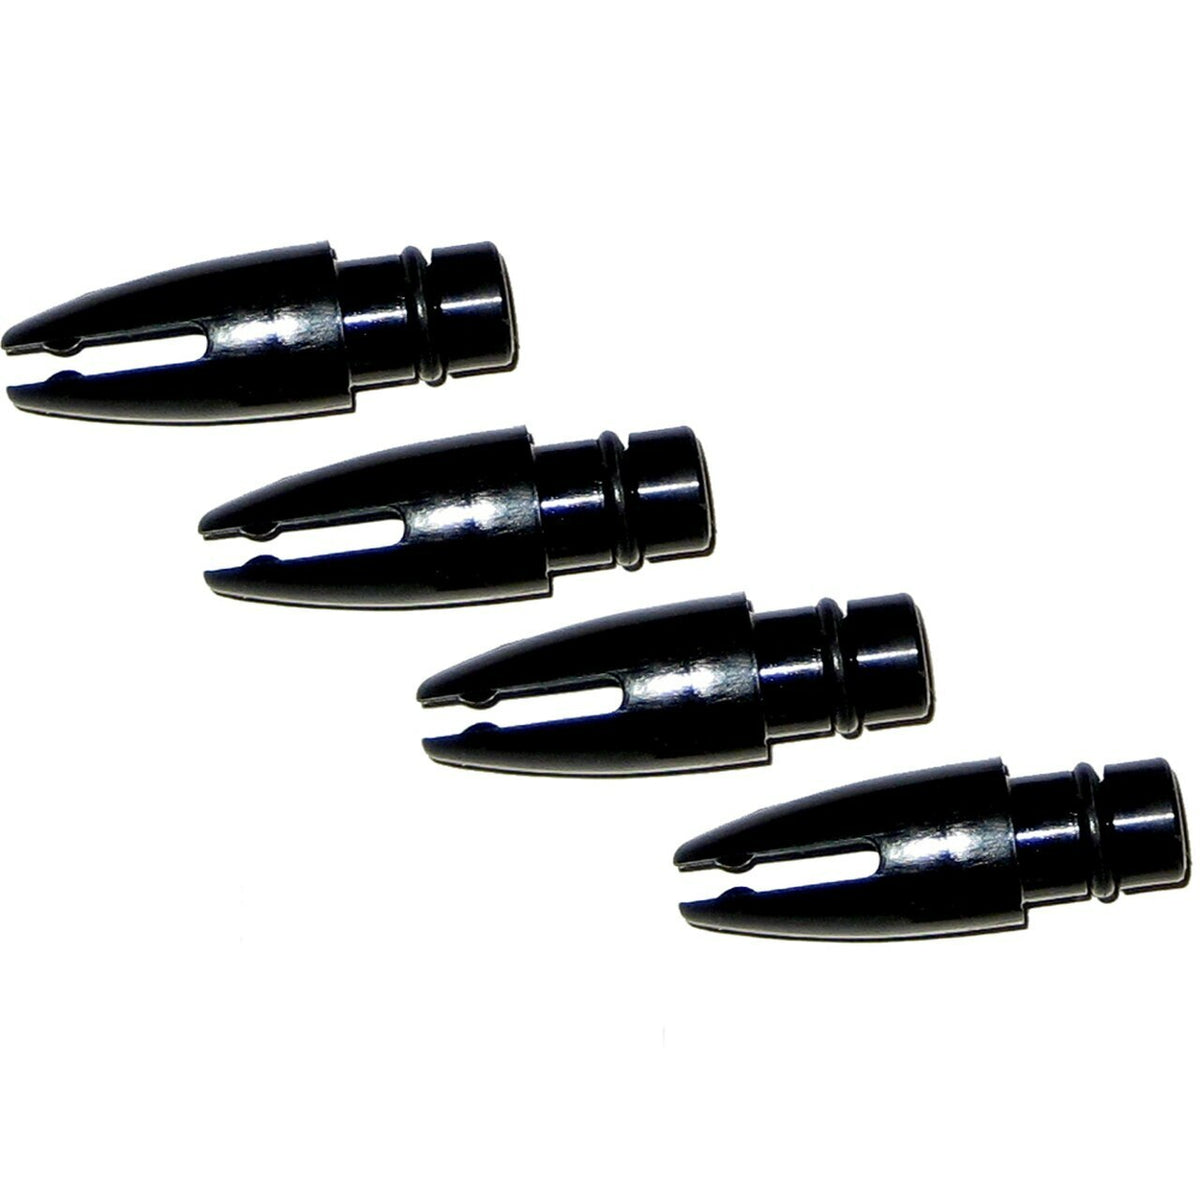 Rupp Outrigger Spreader Replacement Tip 4 Pack